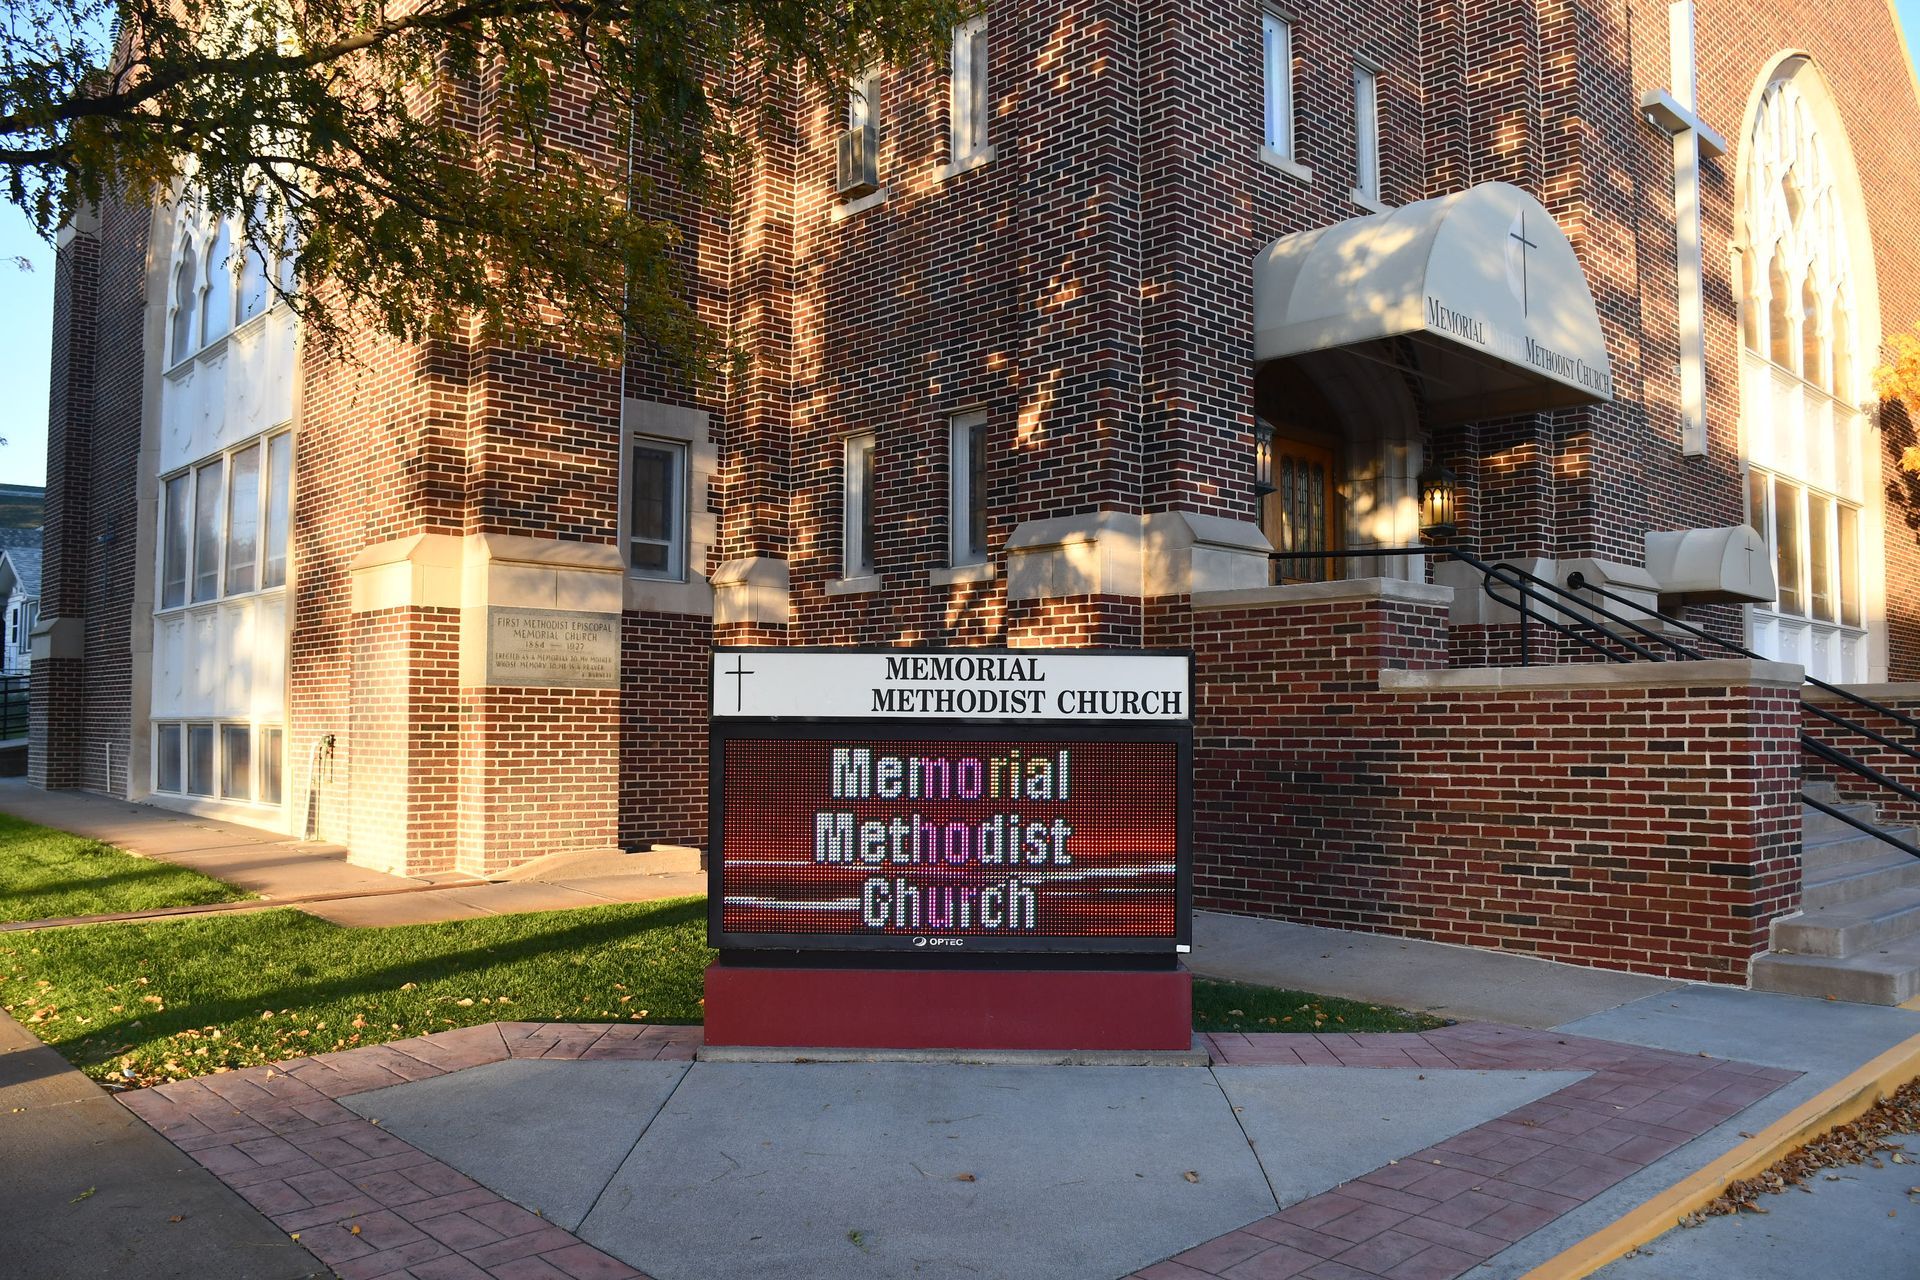 A sign for the Memorial Methodist Church in front of  brick building